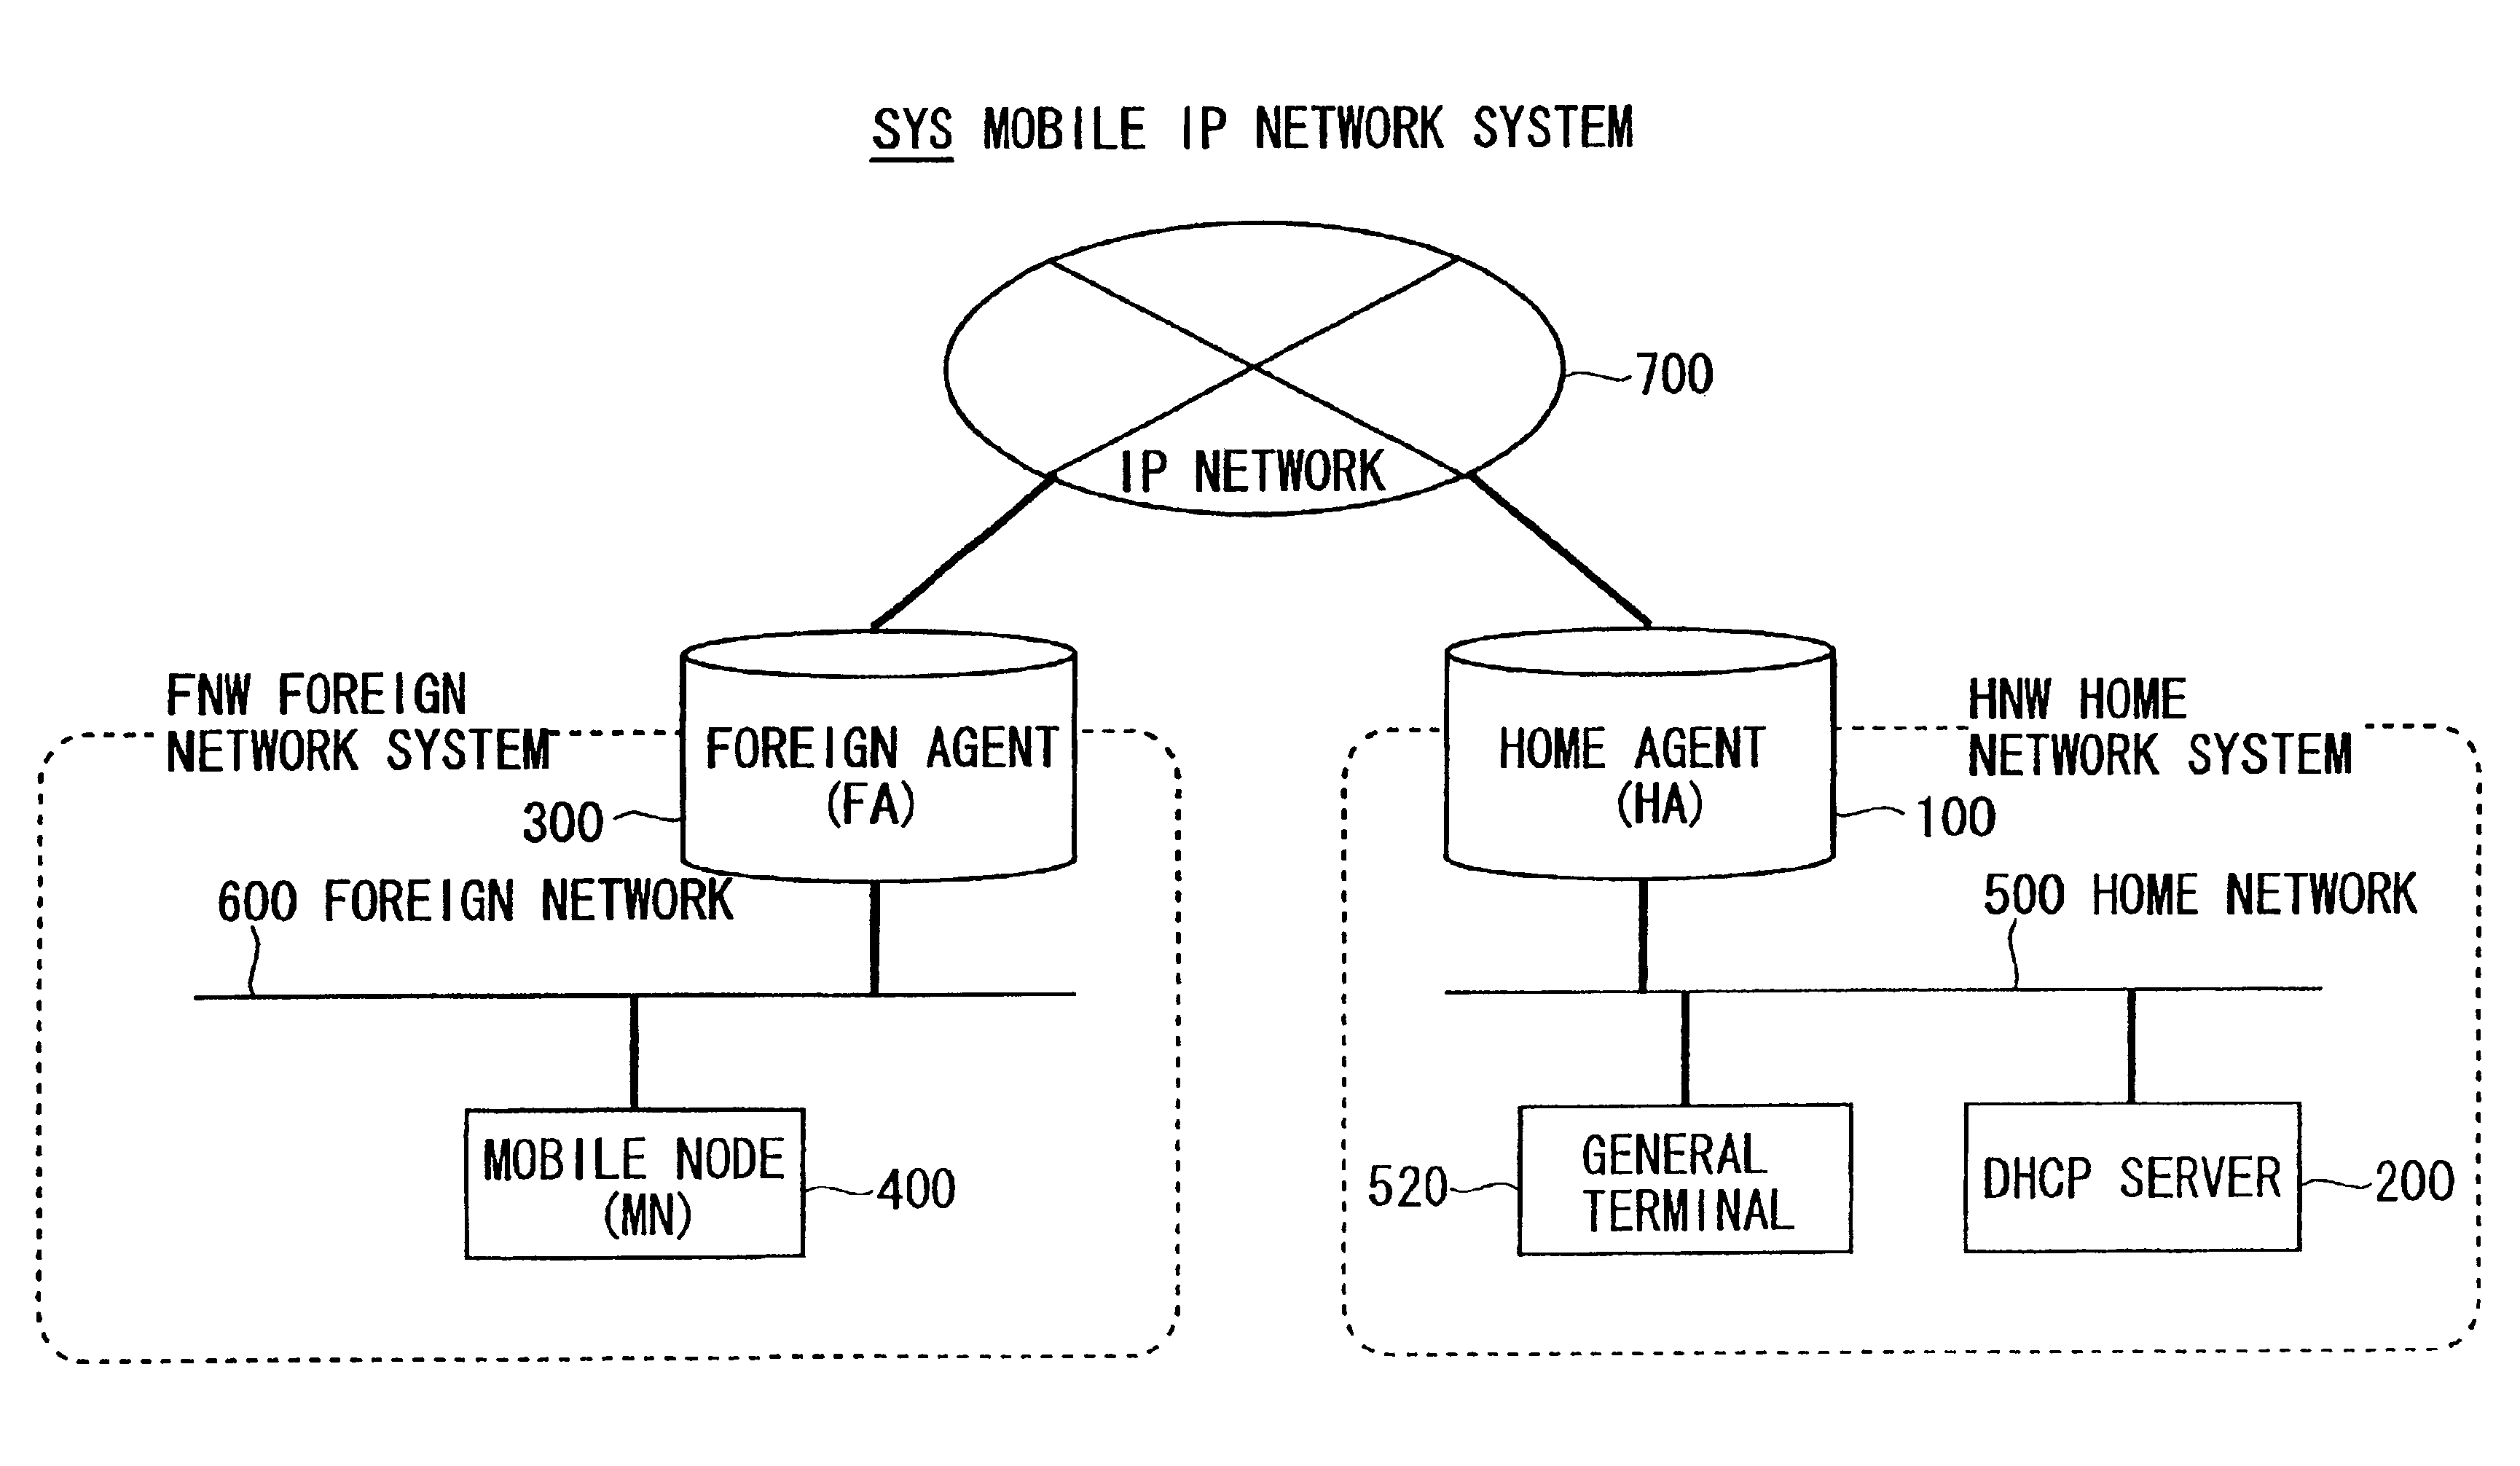 Mobile IP network system